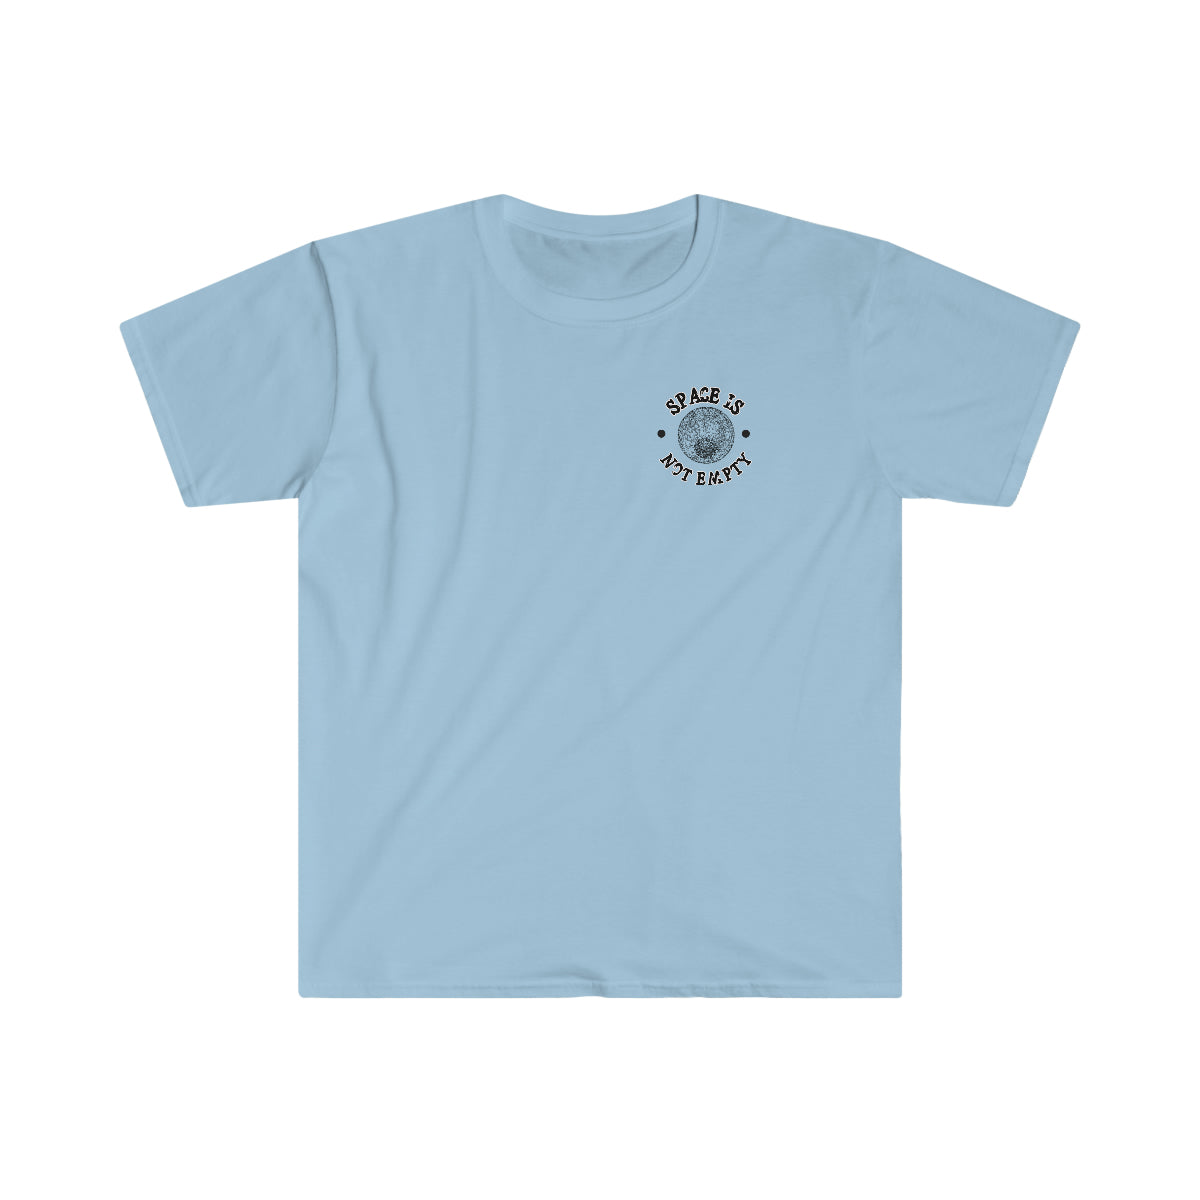 A light blue Apollo Docking T-shirt for the space enthusiast.